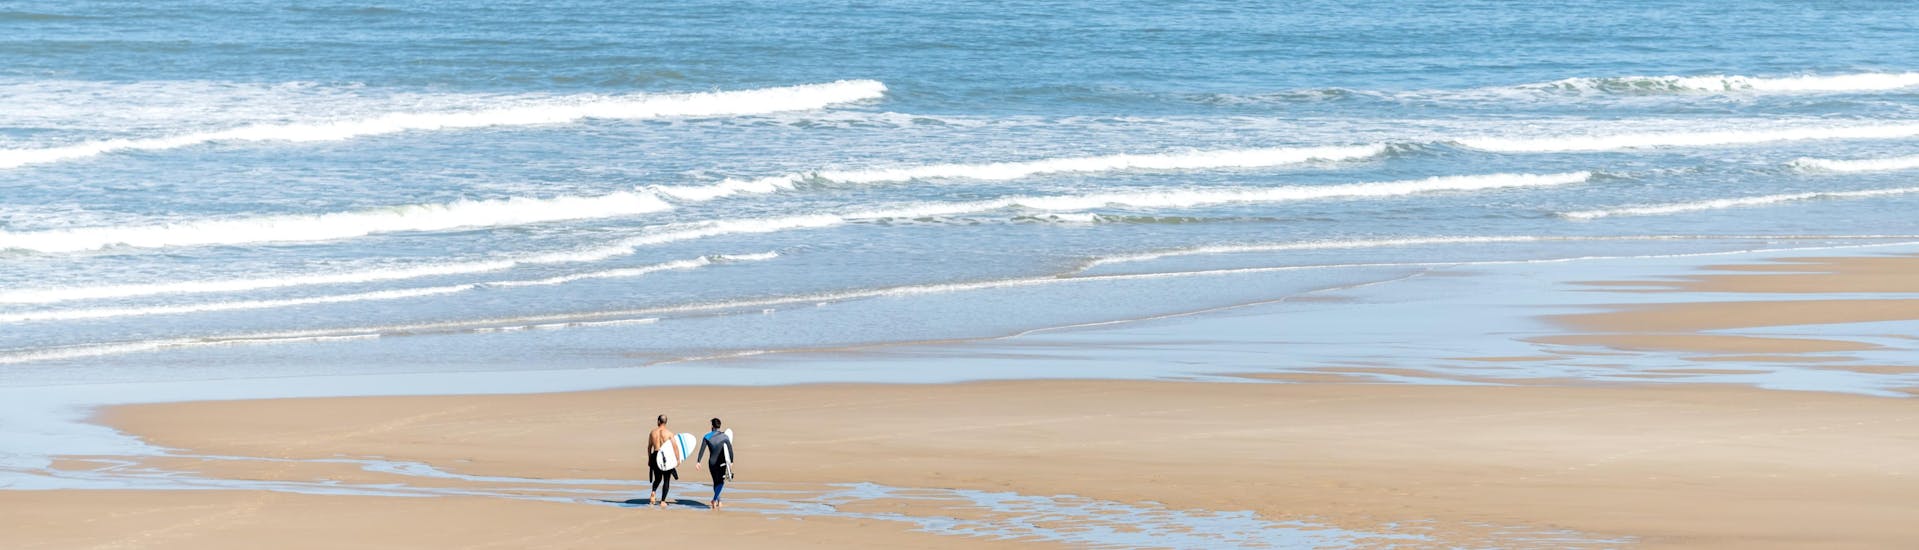 Two men are walking on the Plage Centrale of Lacanau with their surfboard under their arm, where many surfing lessons take place.